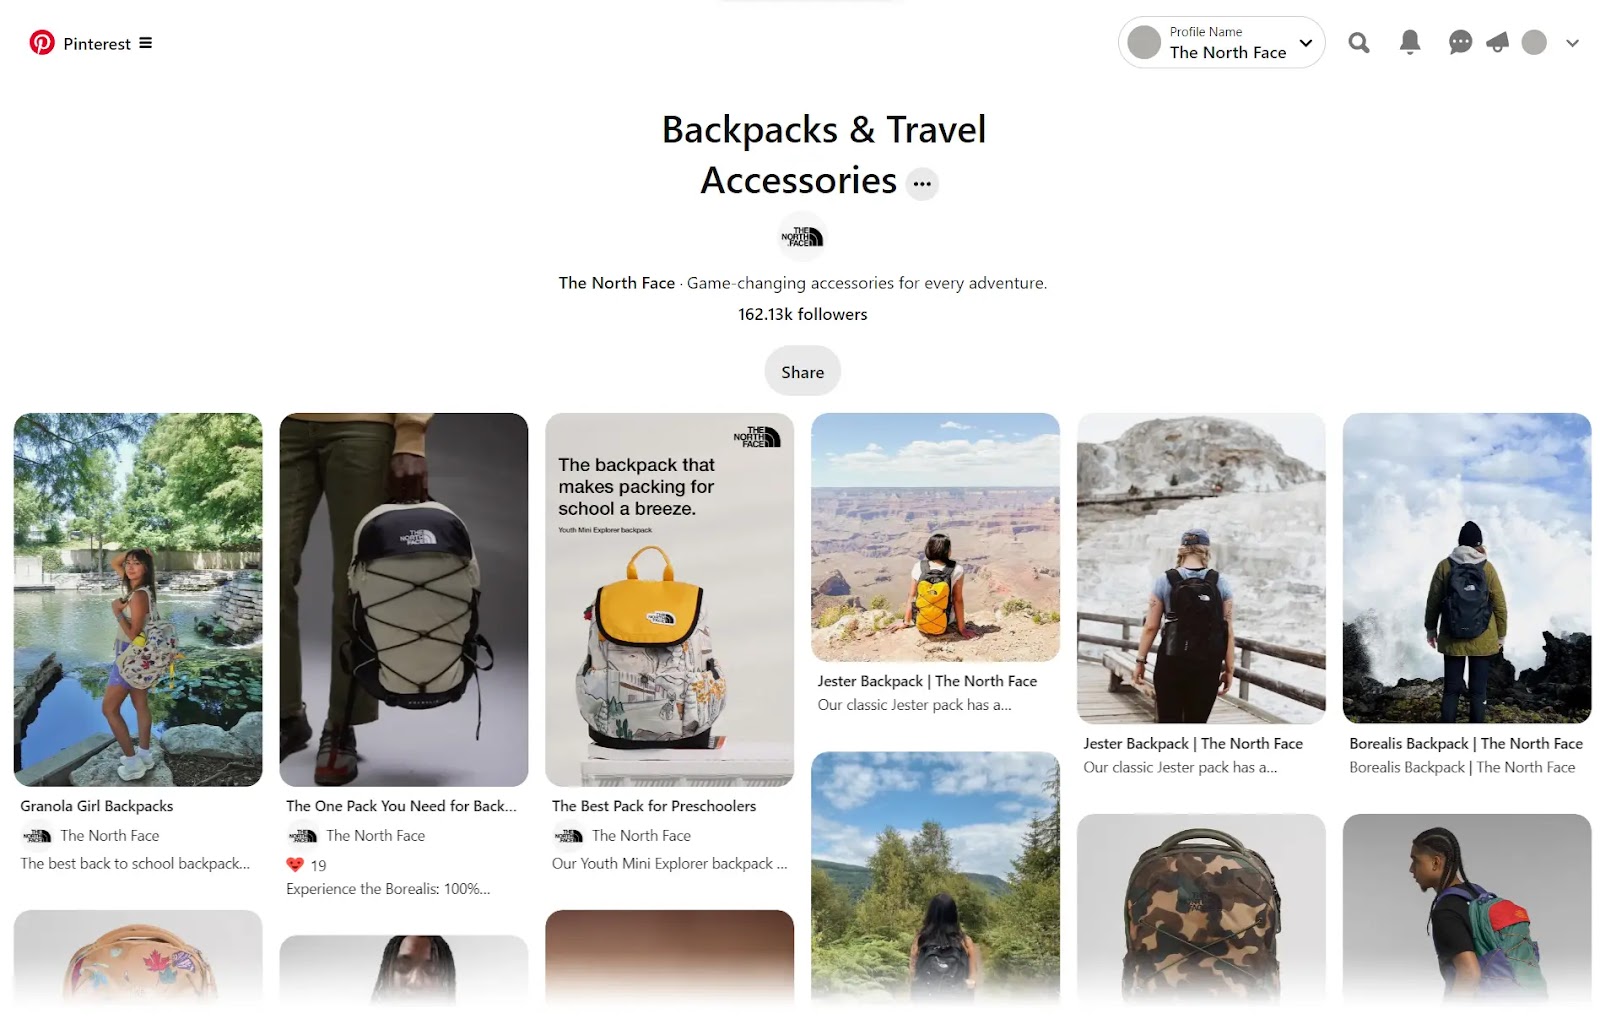 Backpacks & Travel Accessories page on Pinterest